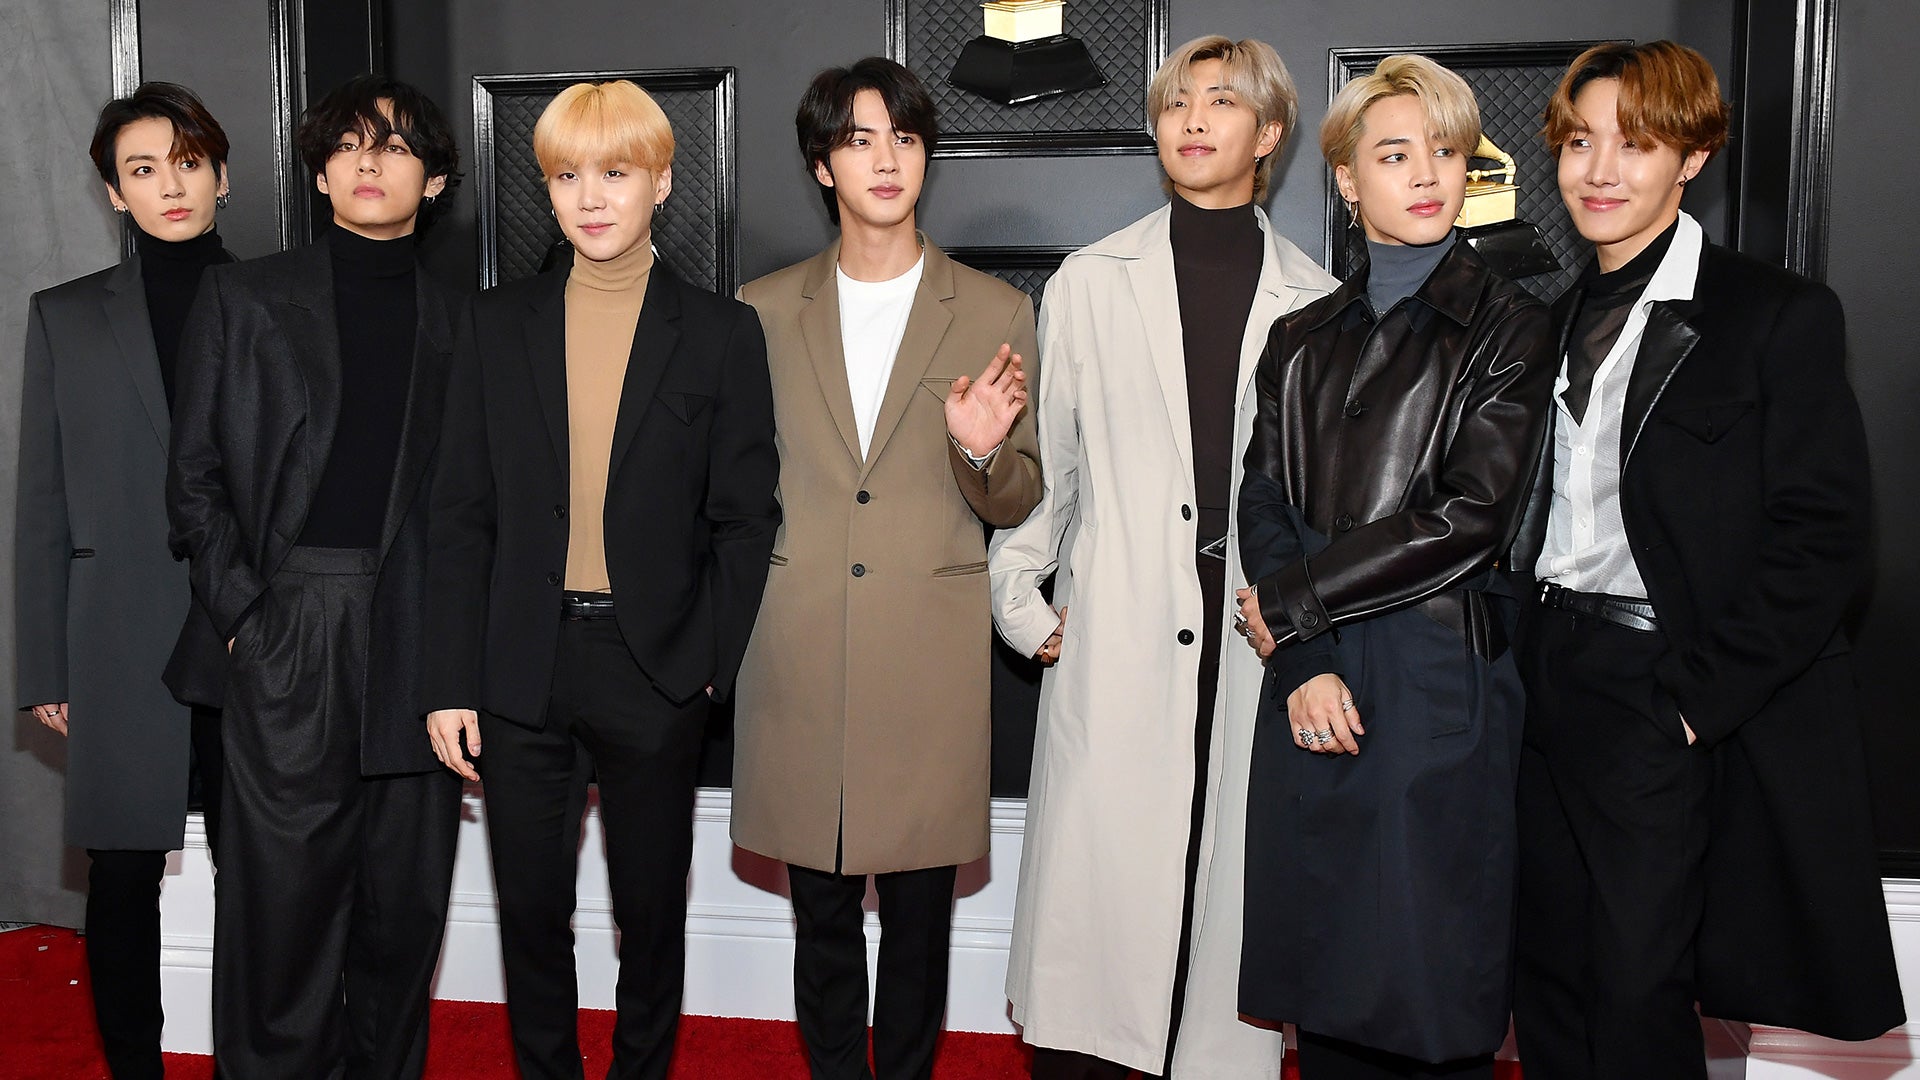 BTS among the presenters of the 64th Grammy Awards nominations